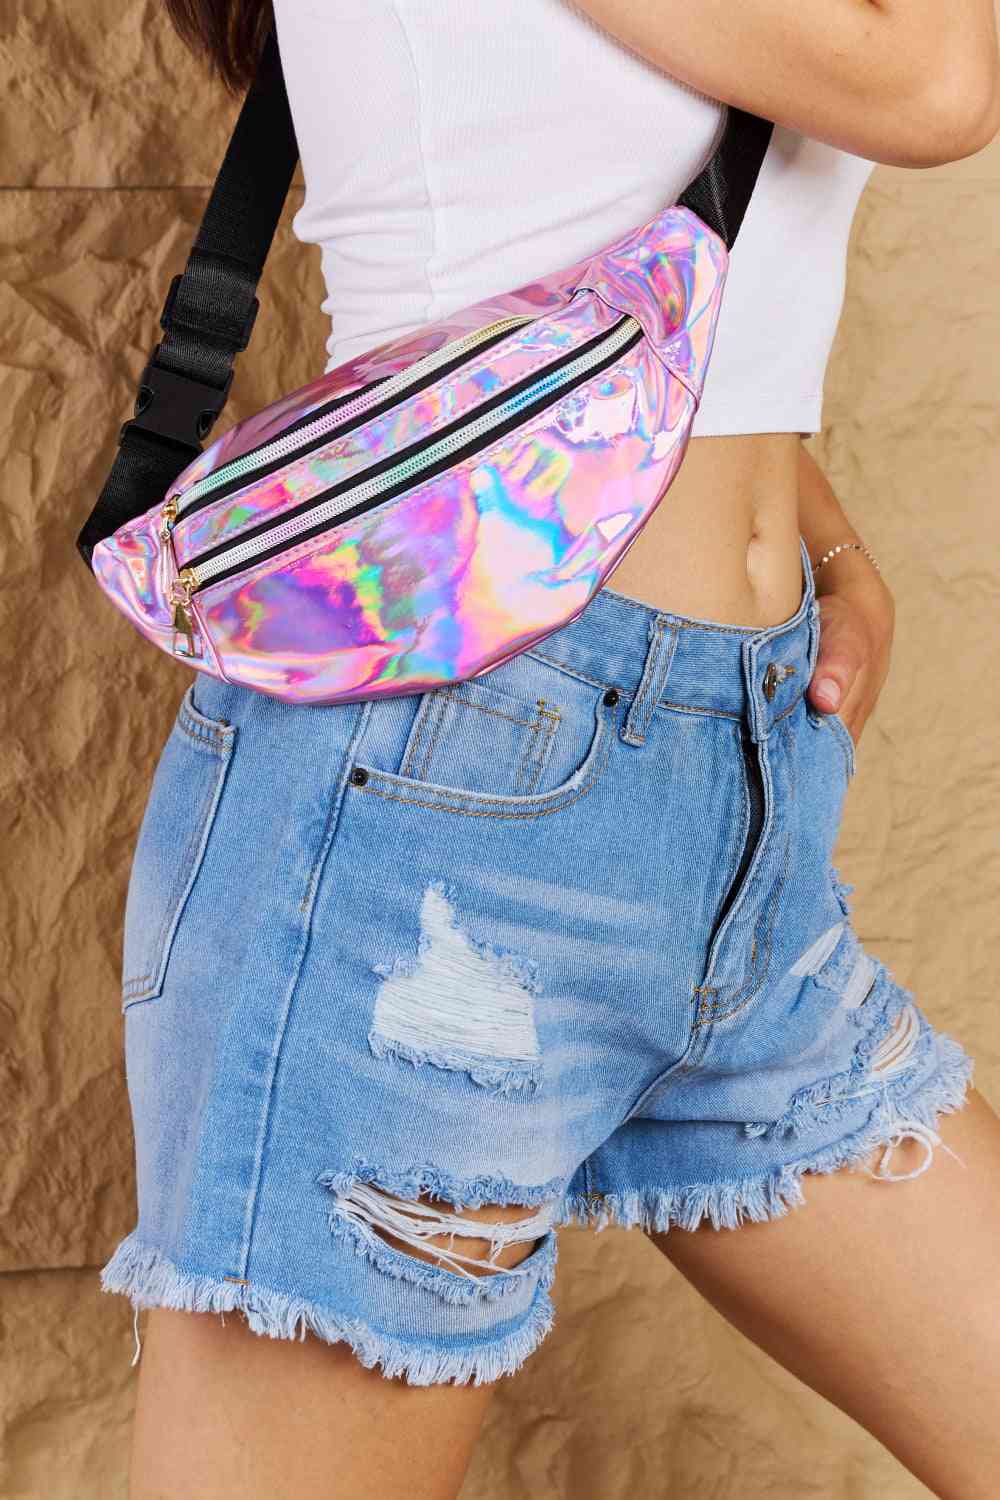 Fame Good Vibrations Holographic Double Zipper Fanny Pack in Hot Pink - Three Bears Boutique